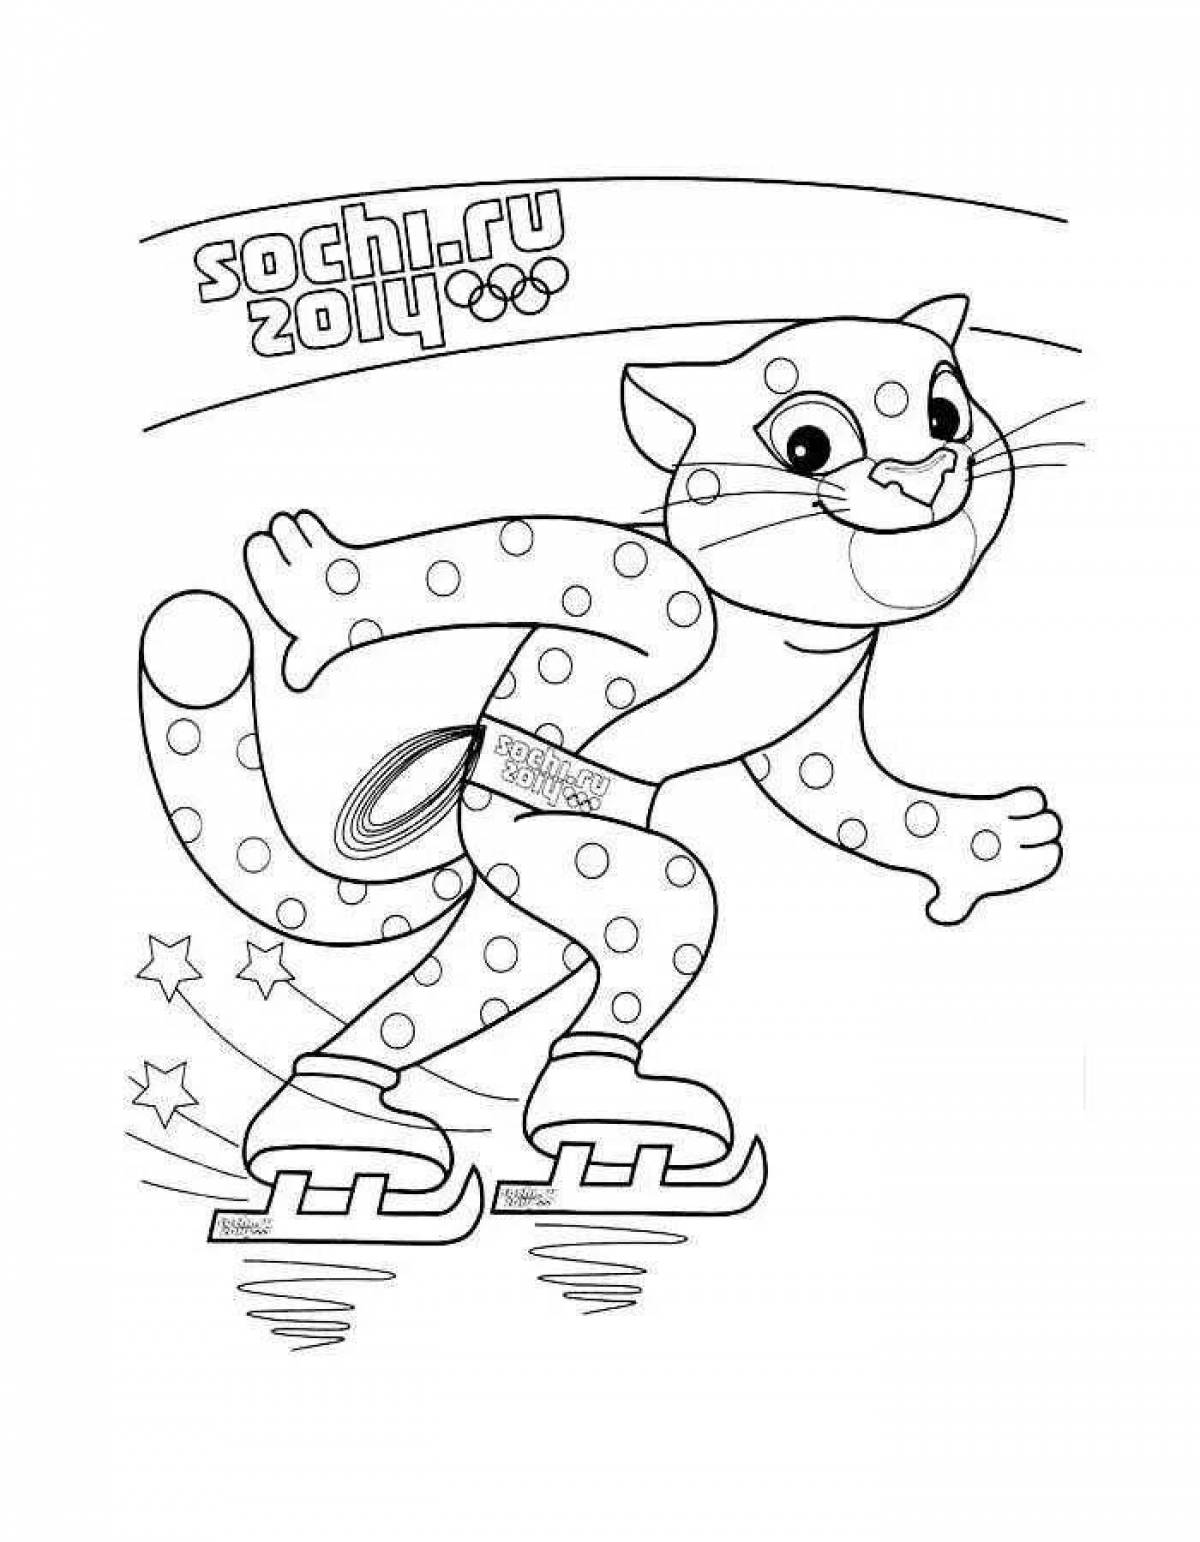 Colorful olympic winter sports coloring page